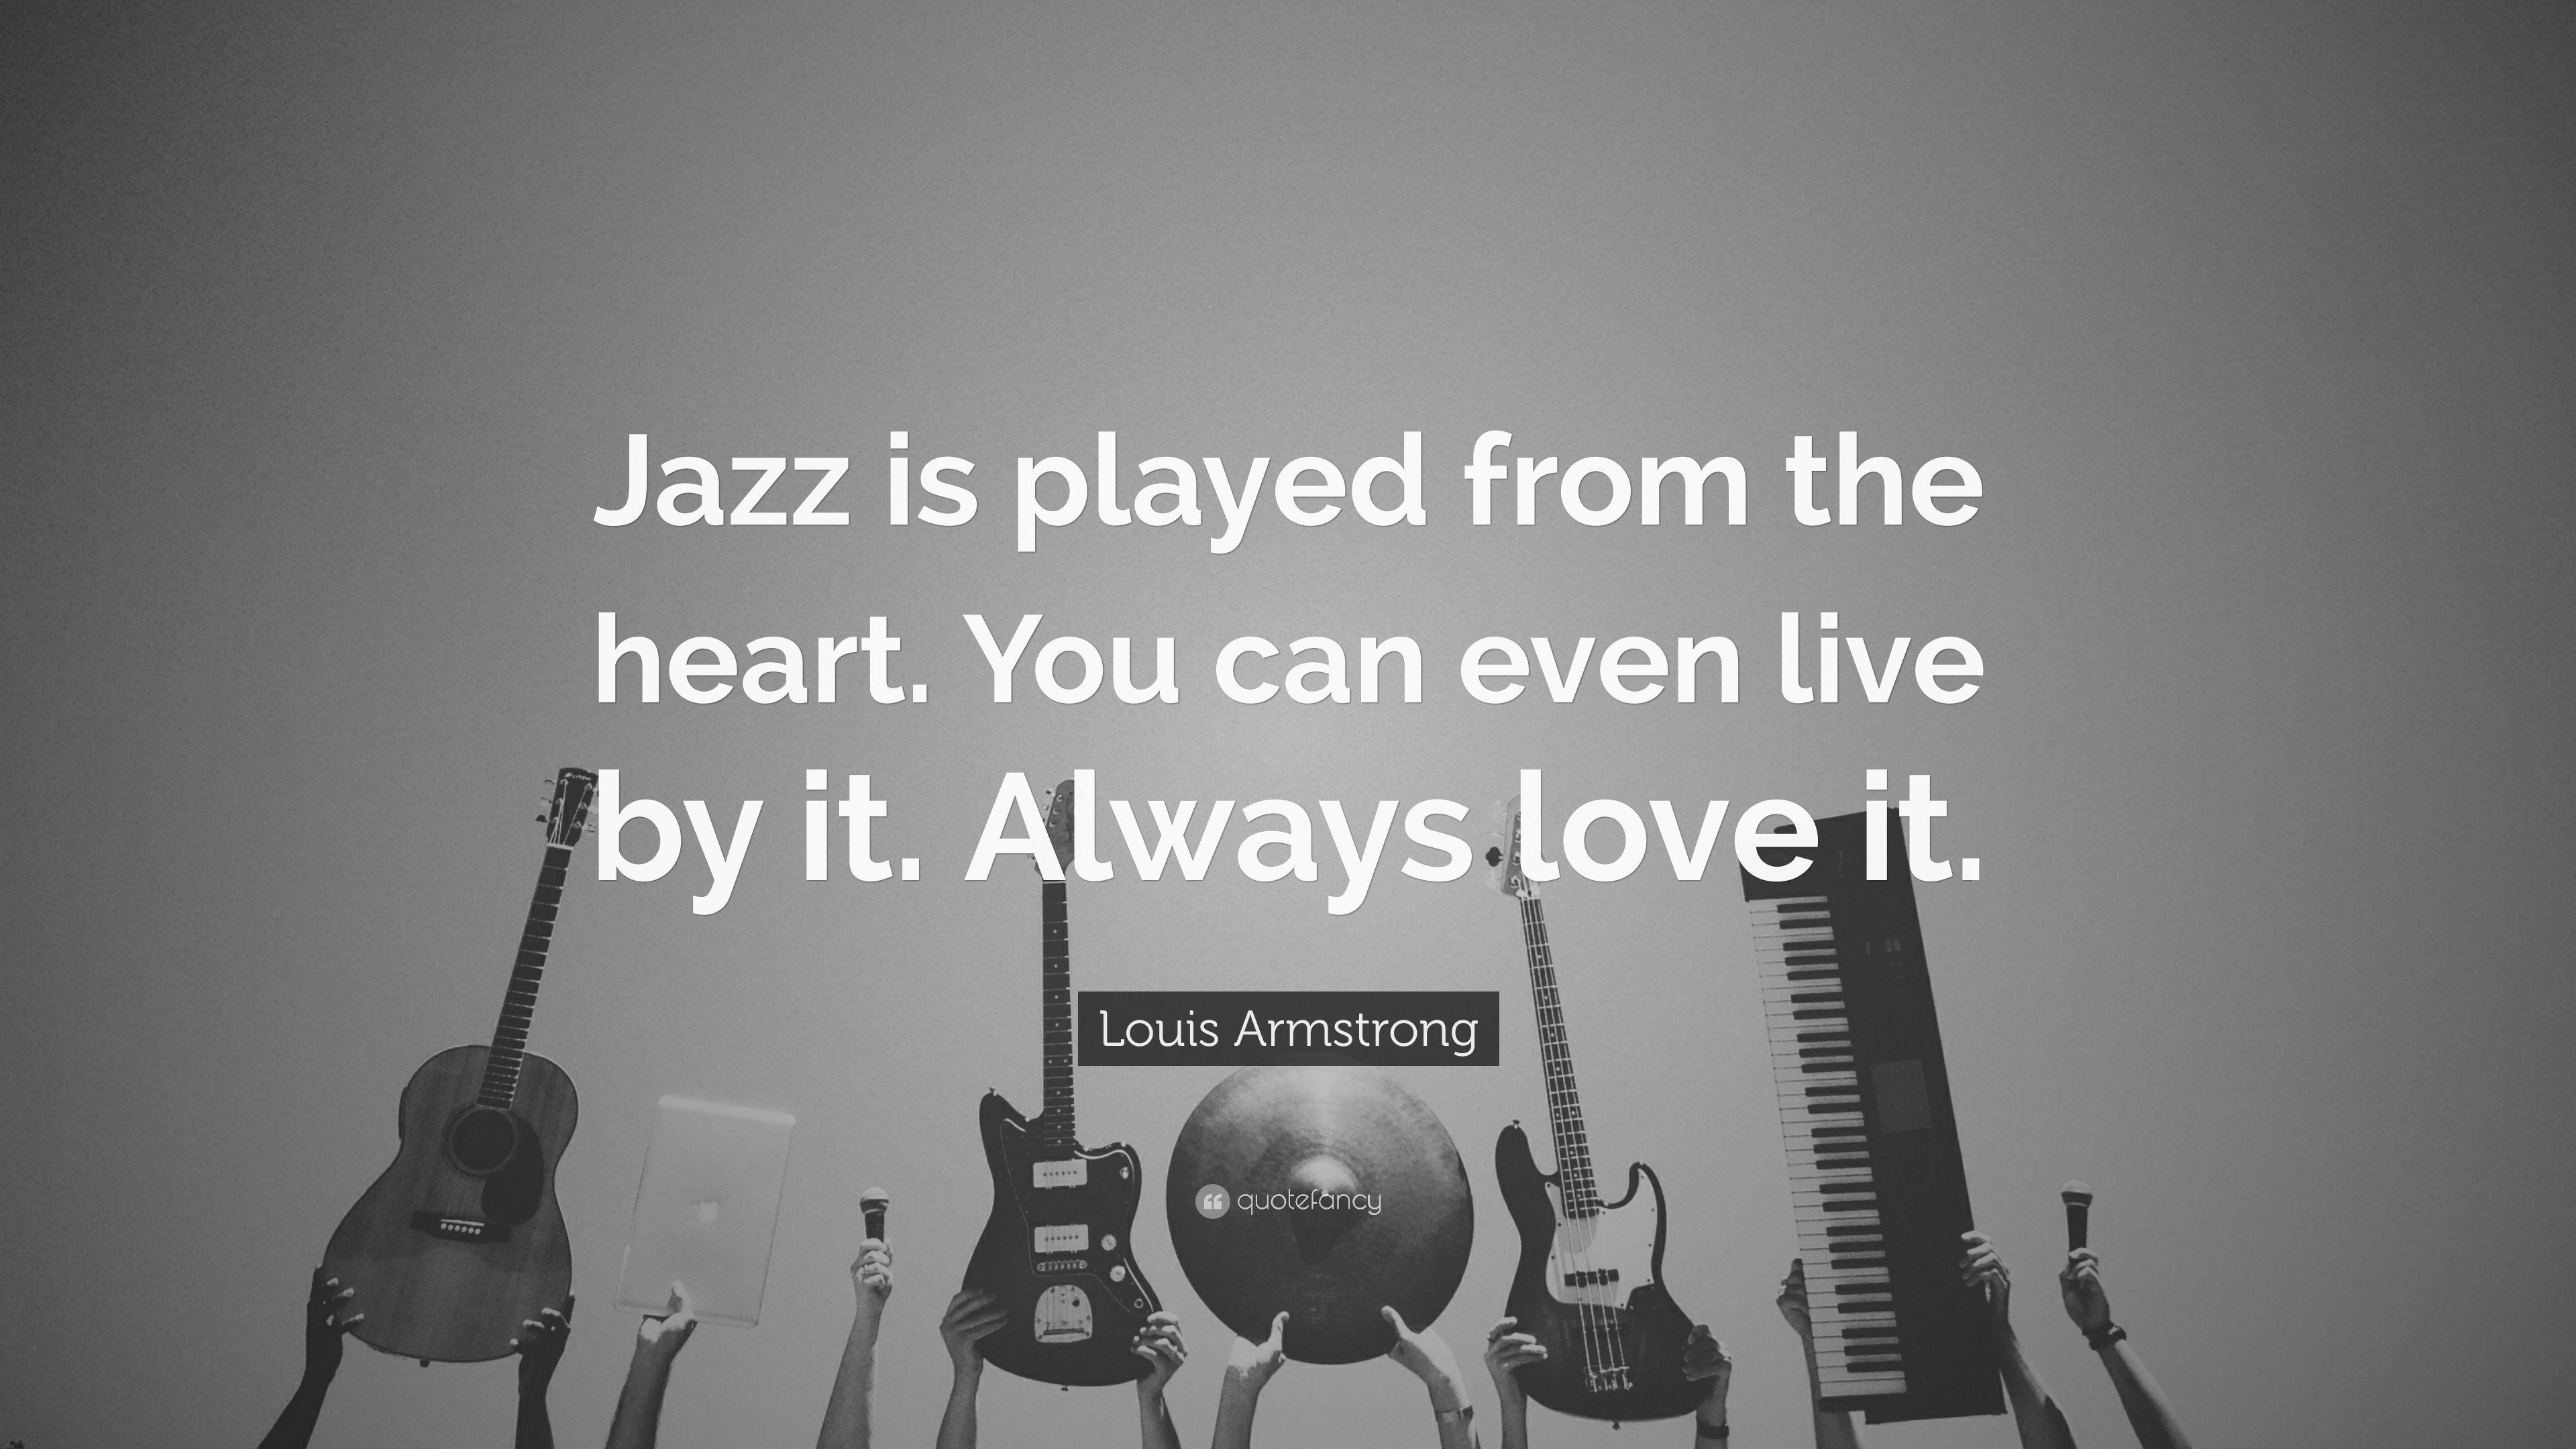 Louis Armstrong Quote: “Jazz is played from the heart. You can even